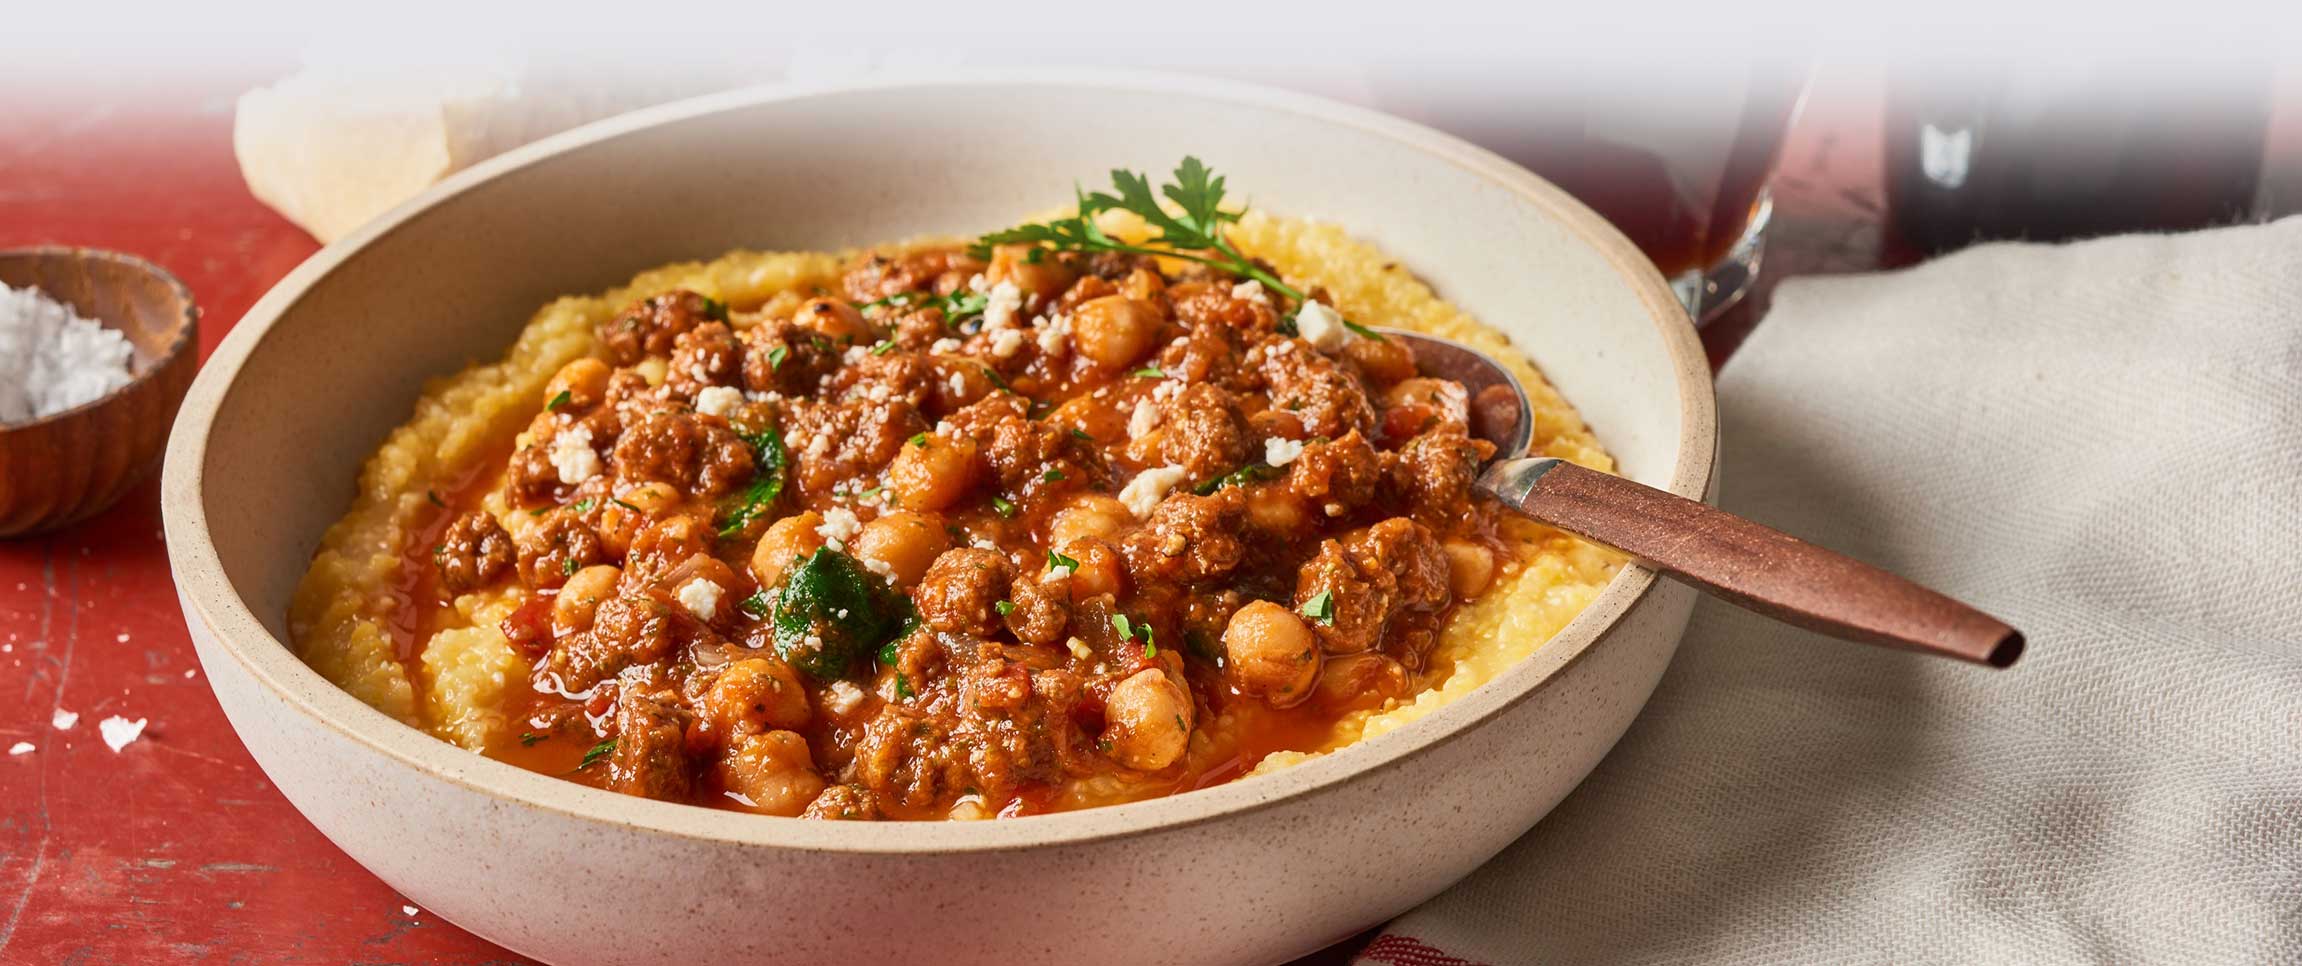 Beef and Chickpea Stew